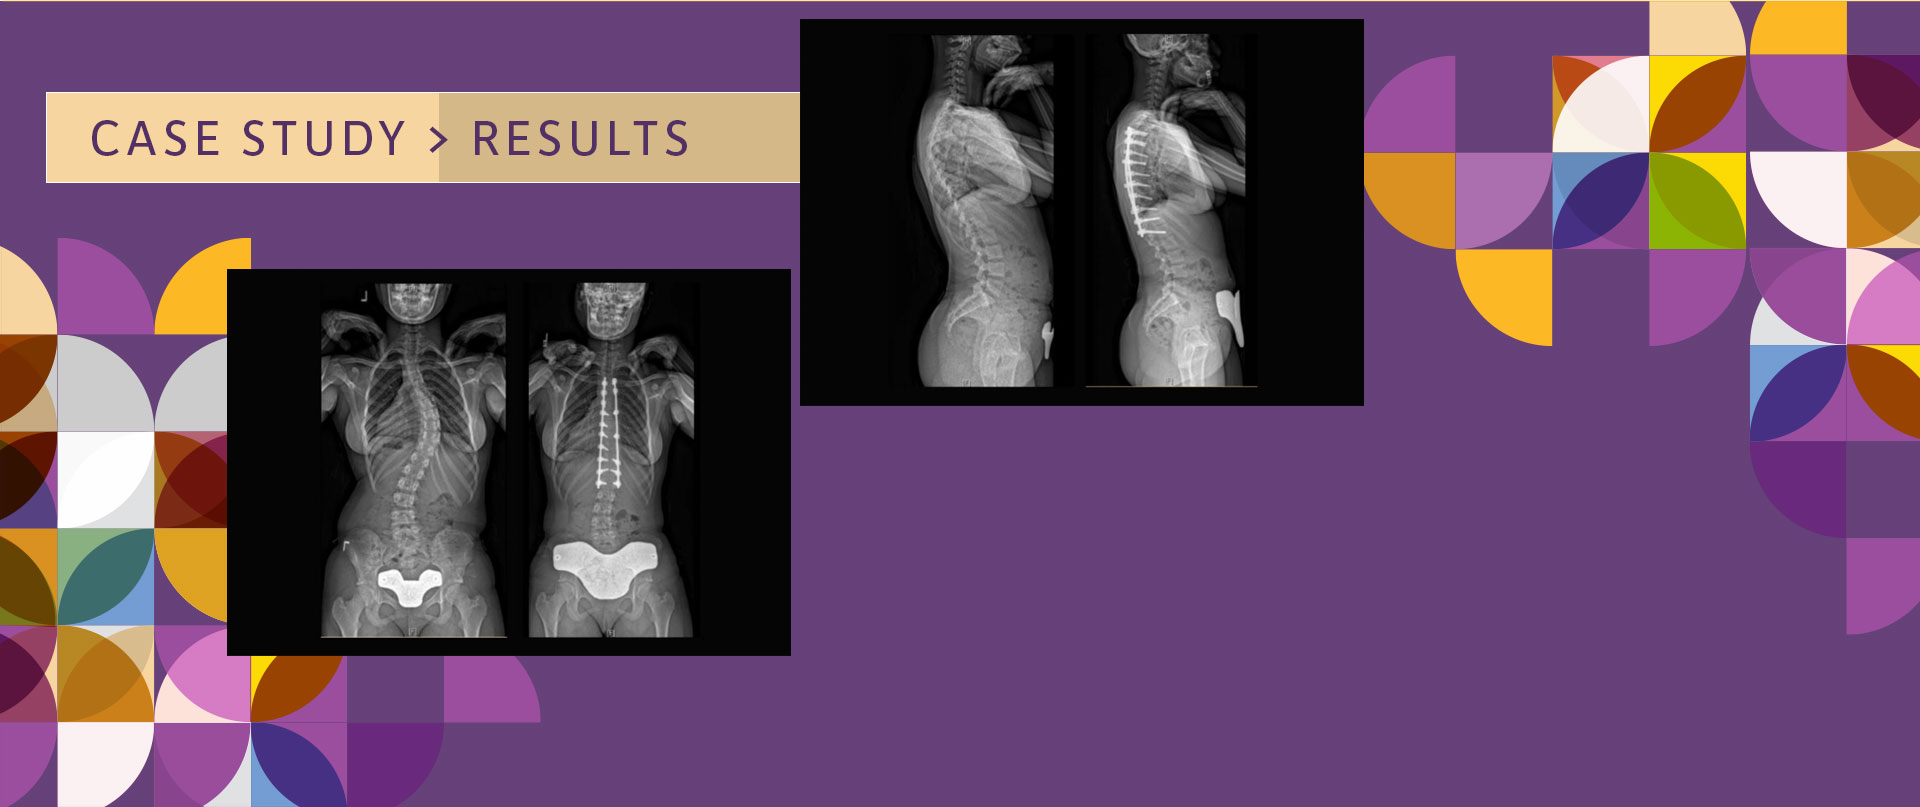 scoliosis case study - results